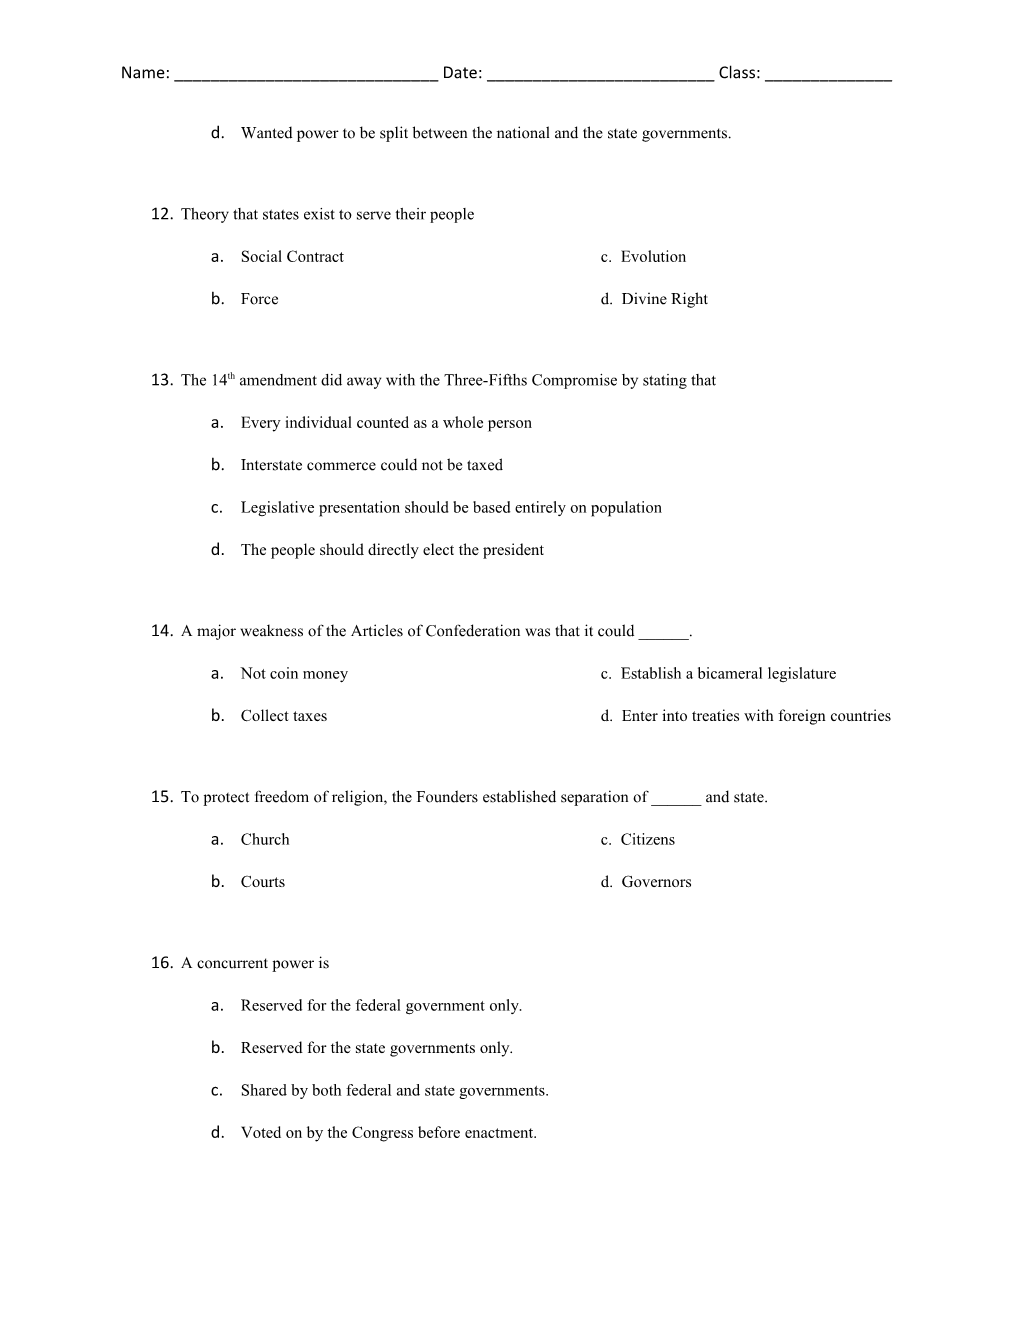 Foundations of American Government Exam (Ch.1, Ch.2, Ch.3, Ch.4)